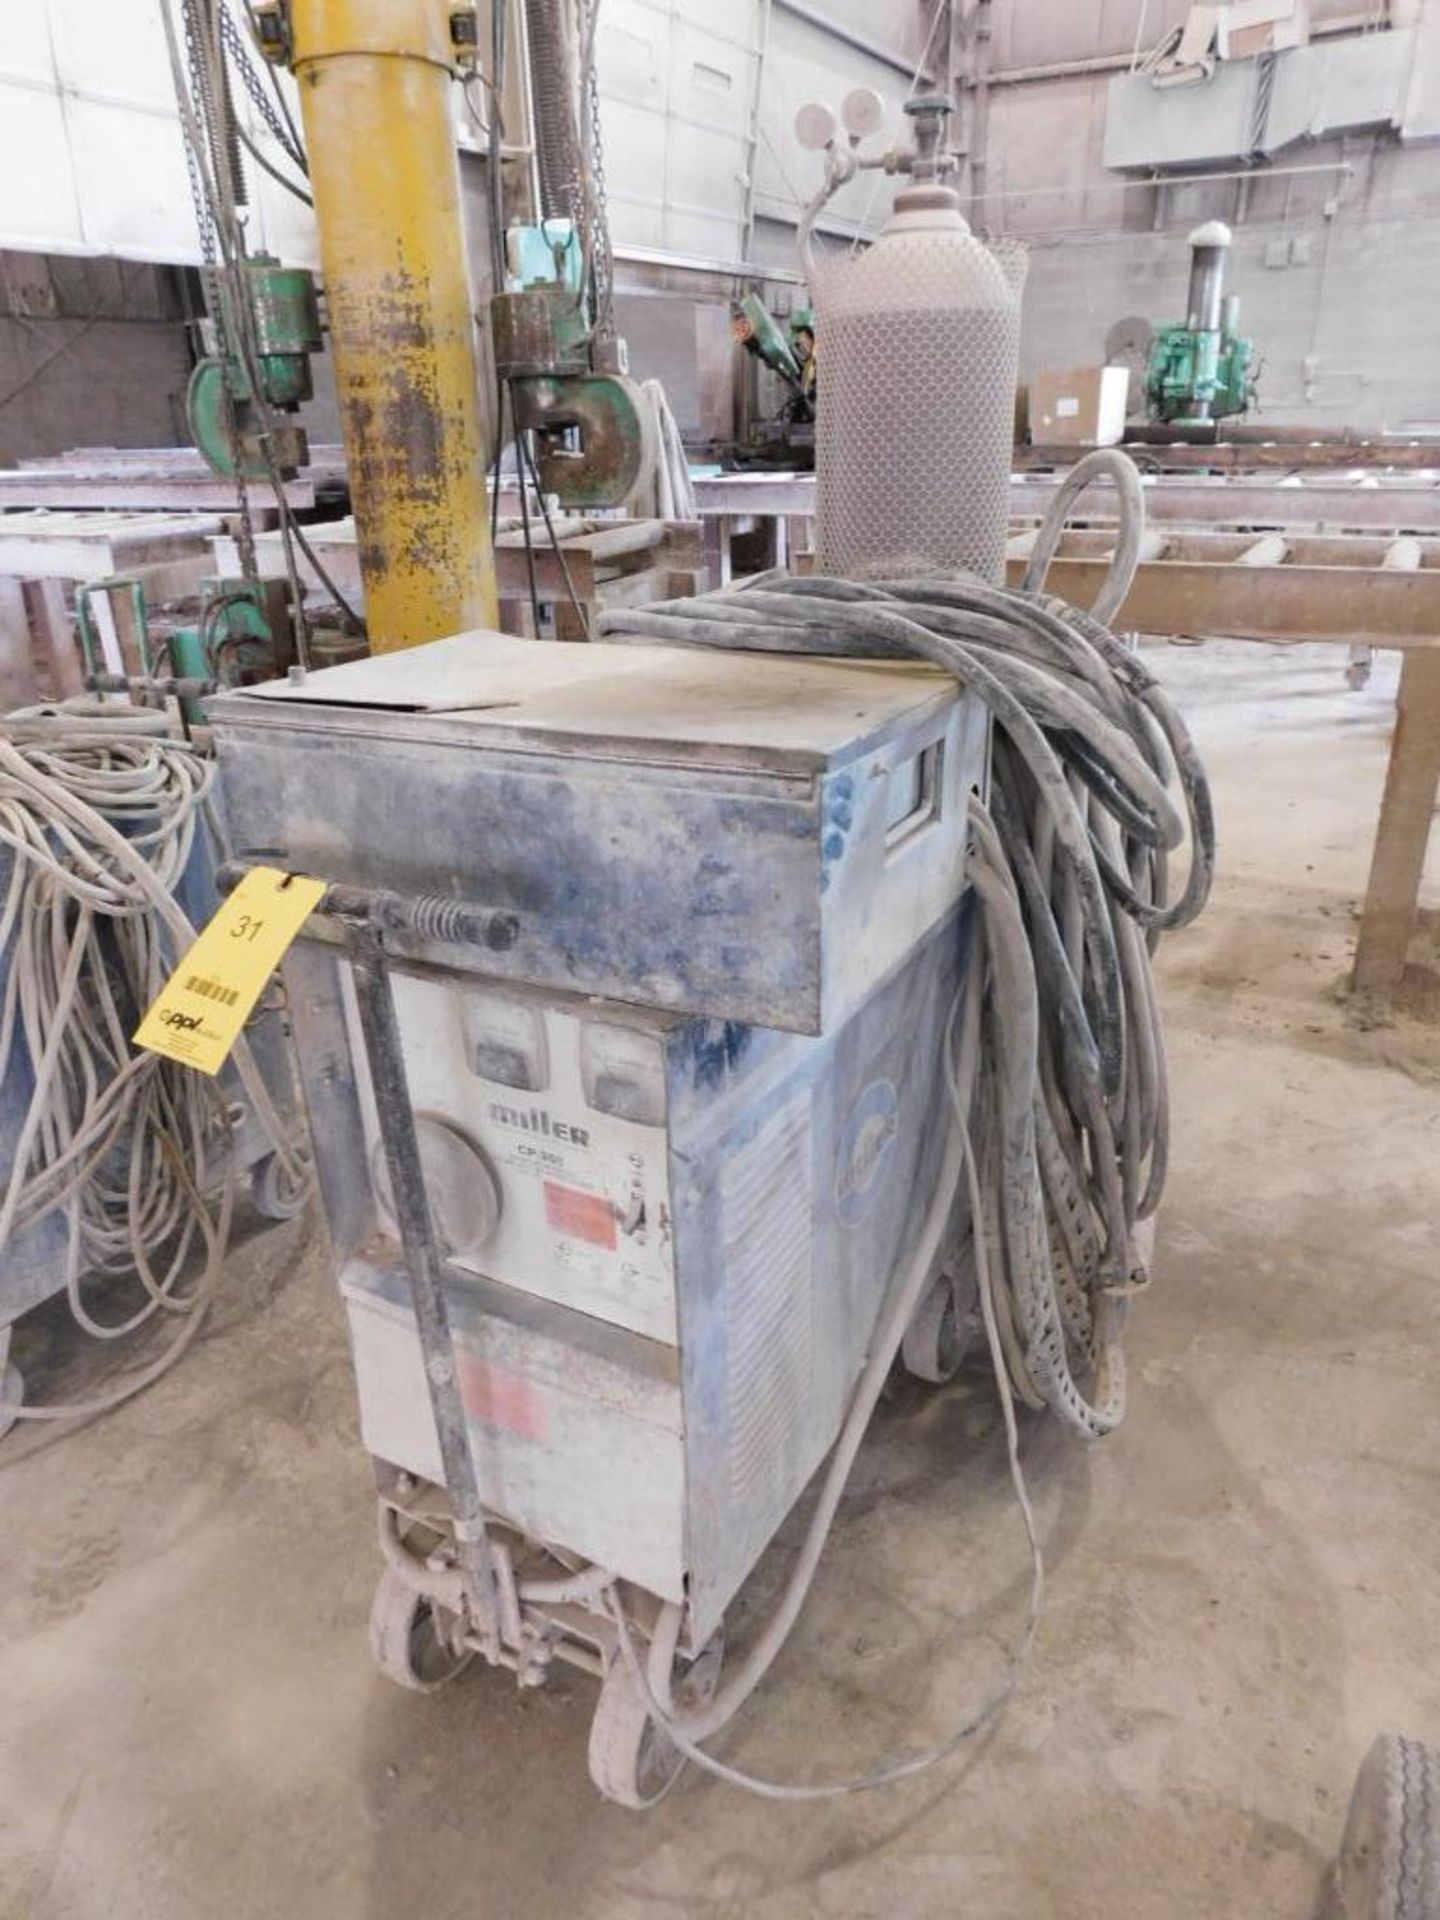 Miller 300 Amp Portable TIG Welder Model CP300, with Cable